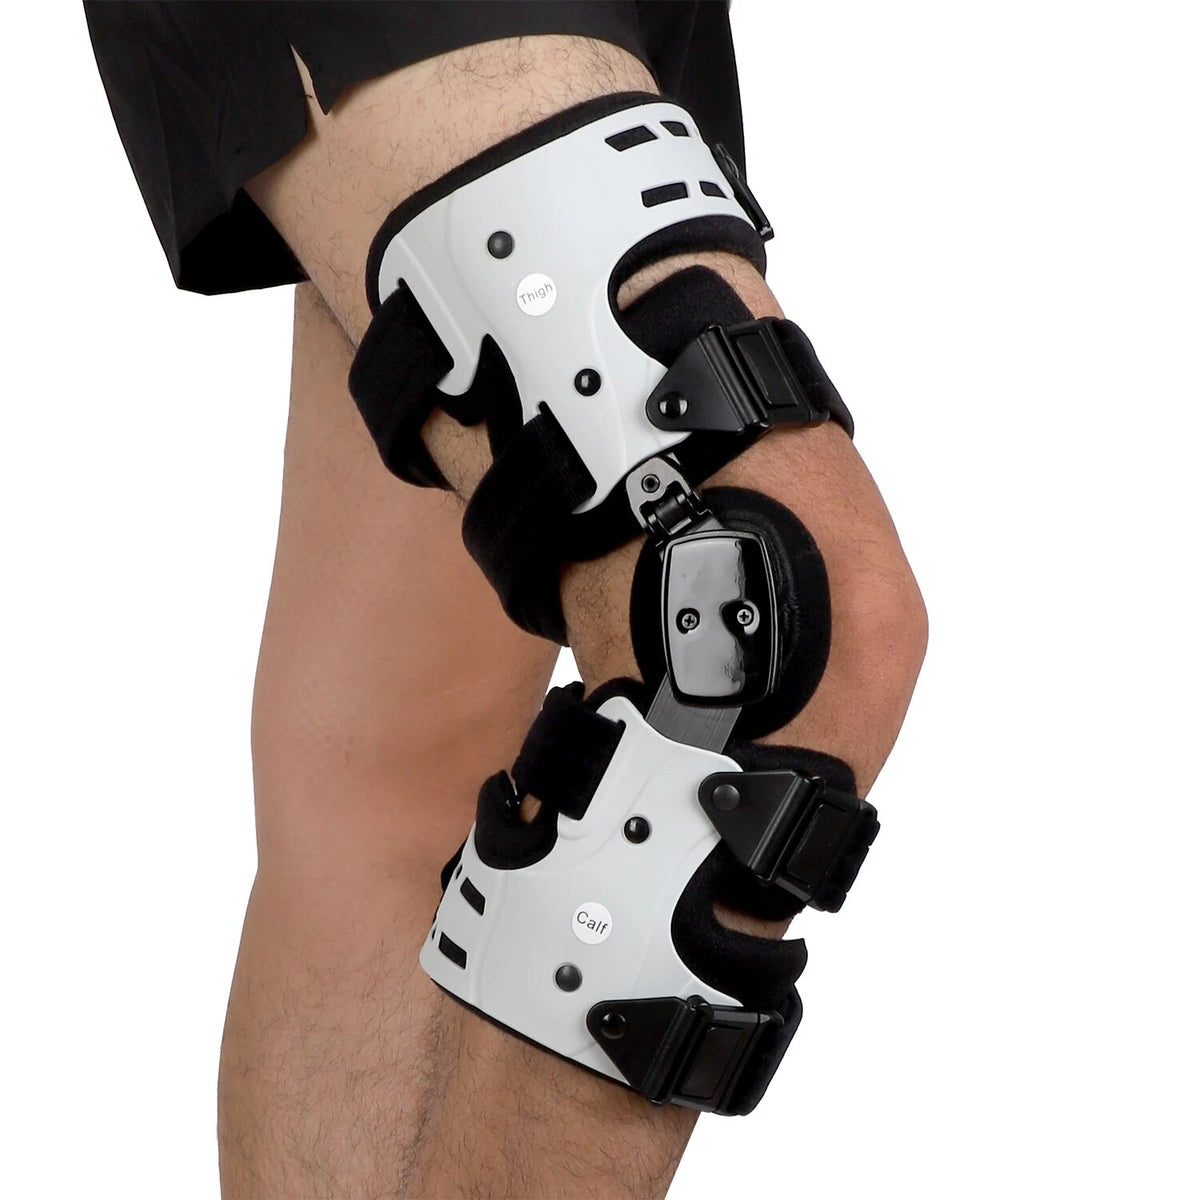 0552Adjustable-ROM-Hinged-Knee-Brace-Support-for-Medial-Join-Pain-Osteoarthritis-Arthritis-Unloader-Cartilage-Defect-Protection.jpg__PID:686fae07-6e12-46bf-b69c-6c4a72b3d1a7